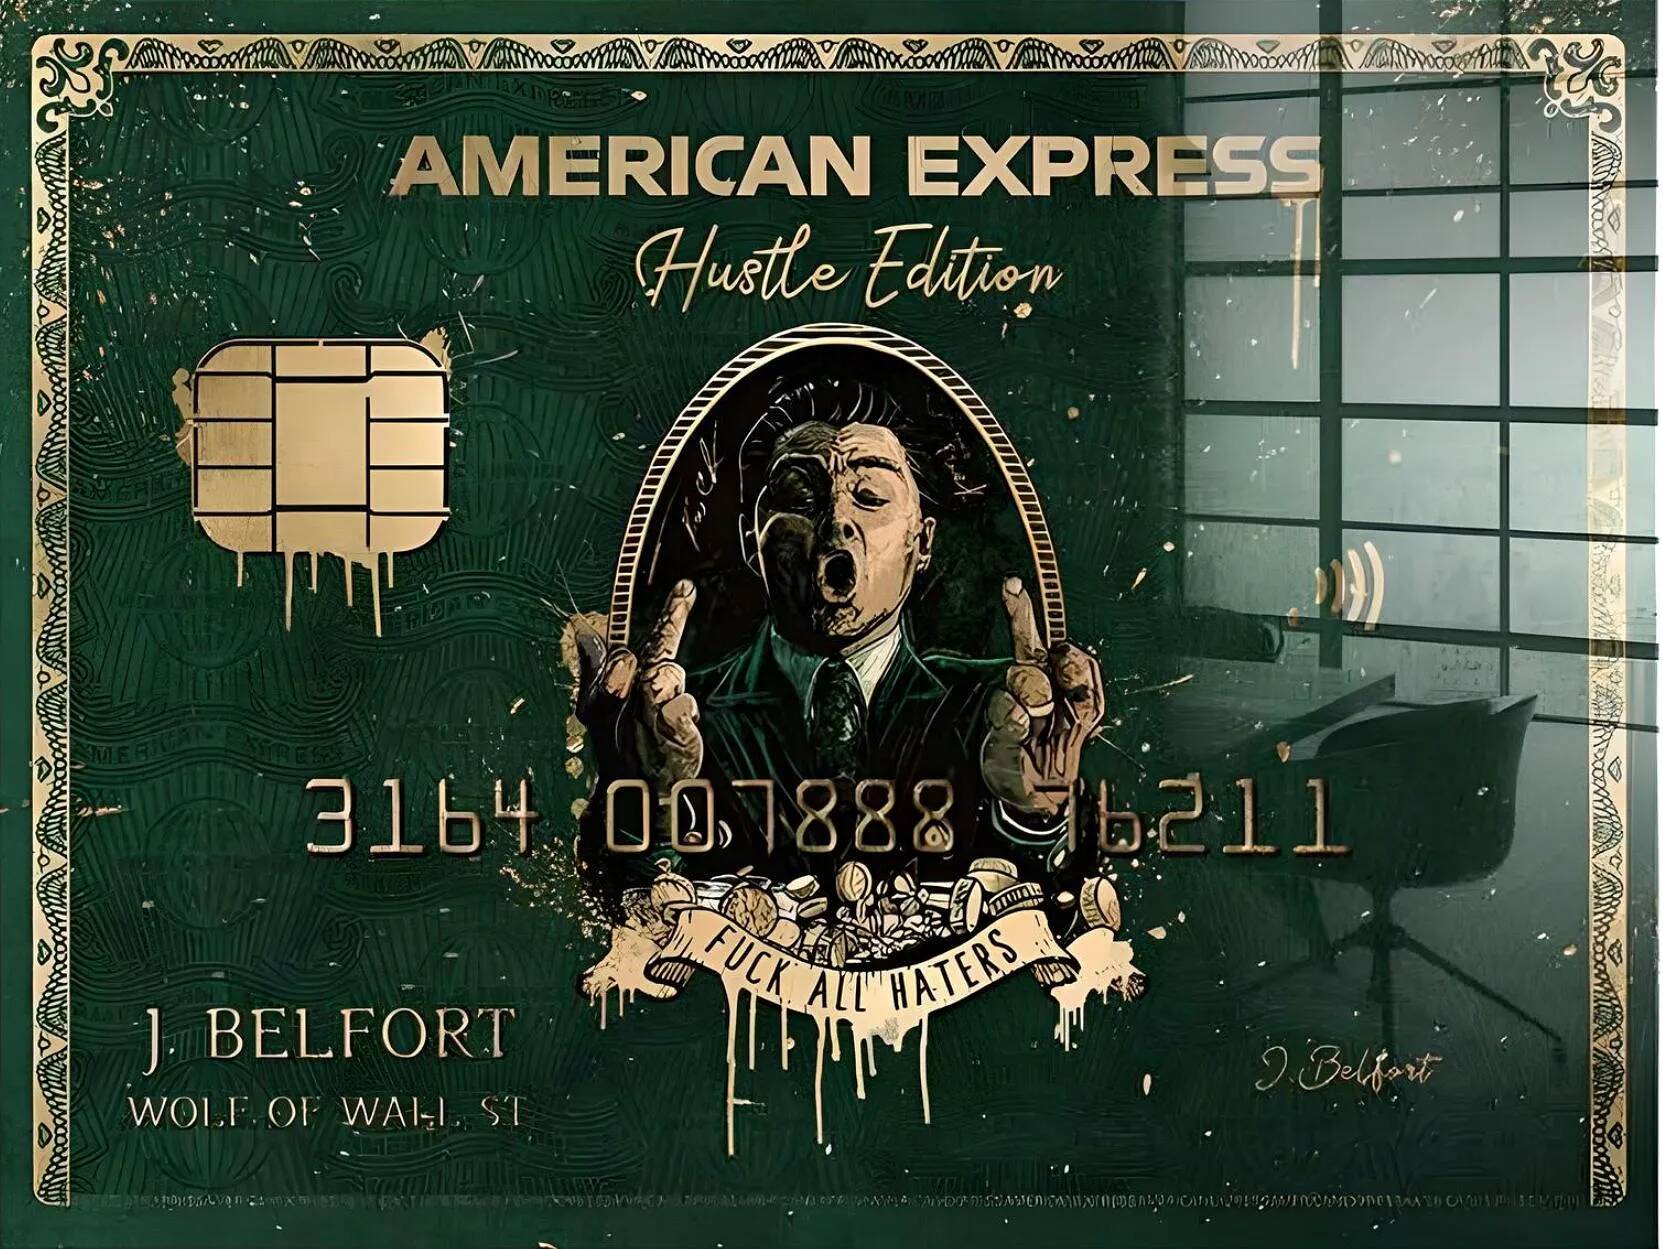 Tableau feuille d'or Royal Green American Express